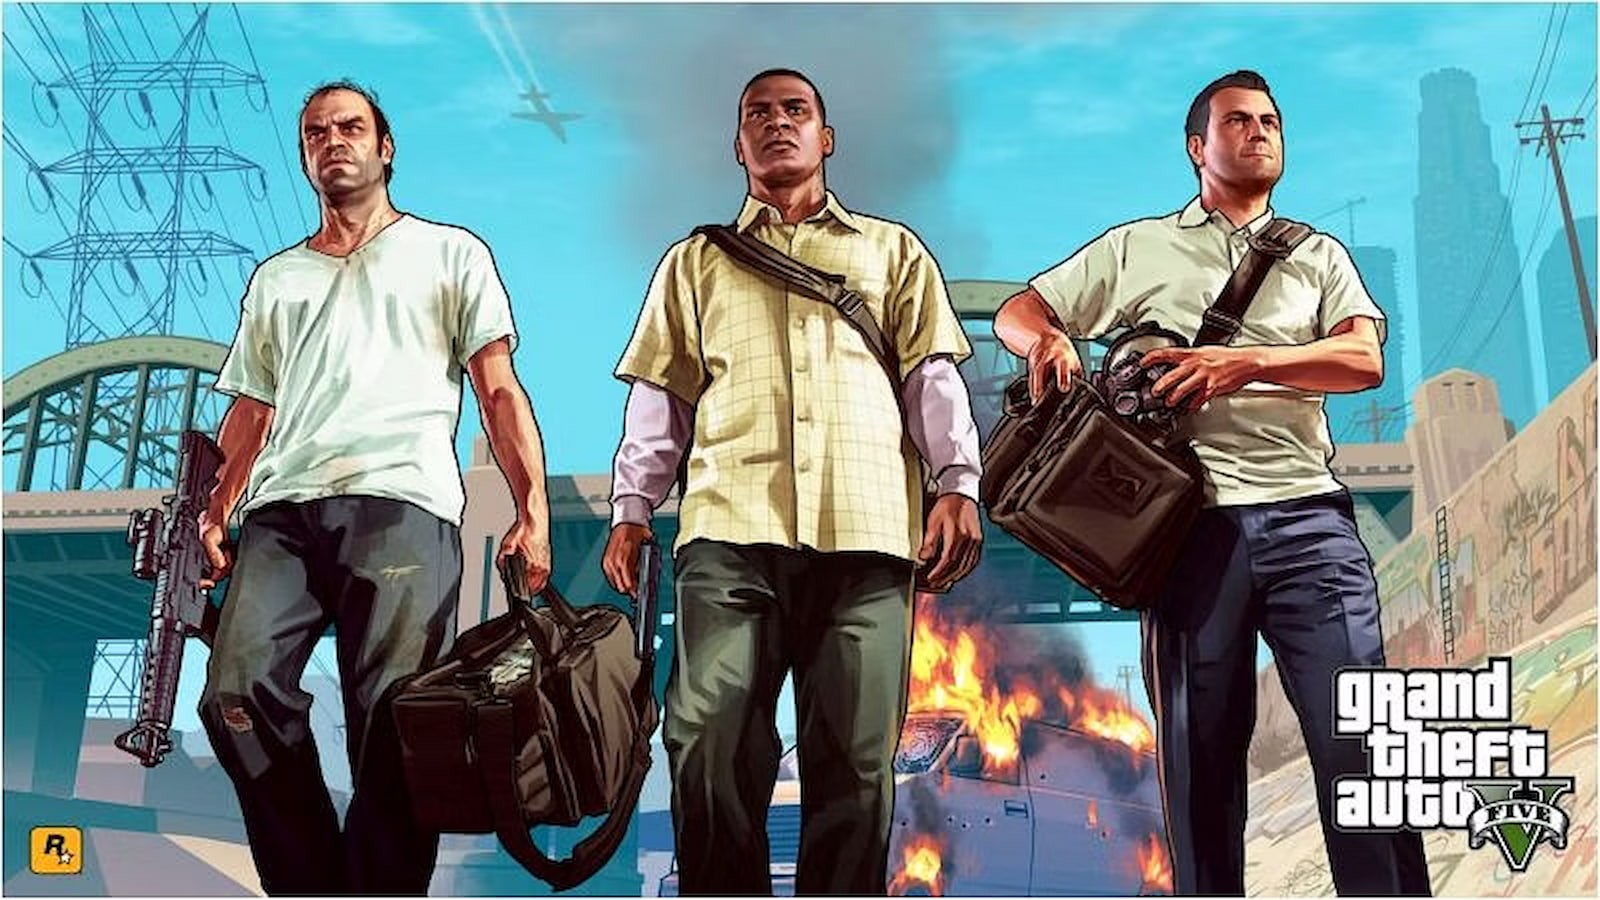 Grand Theft Auto 5 is the third most downloaded game on PS5 in both the US/Canada and the EU.